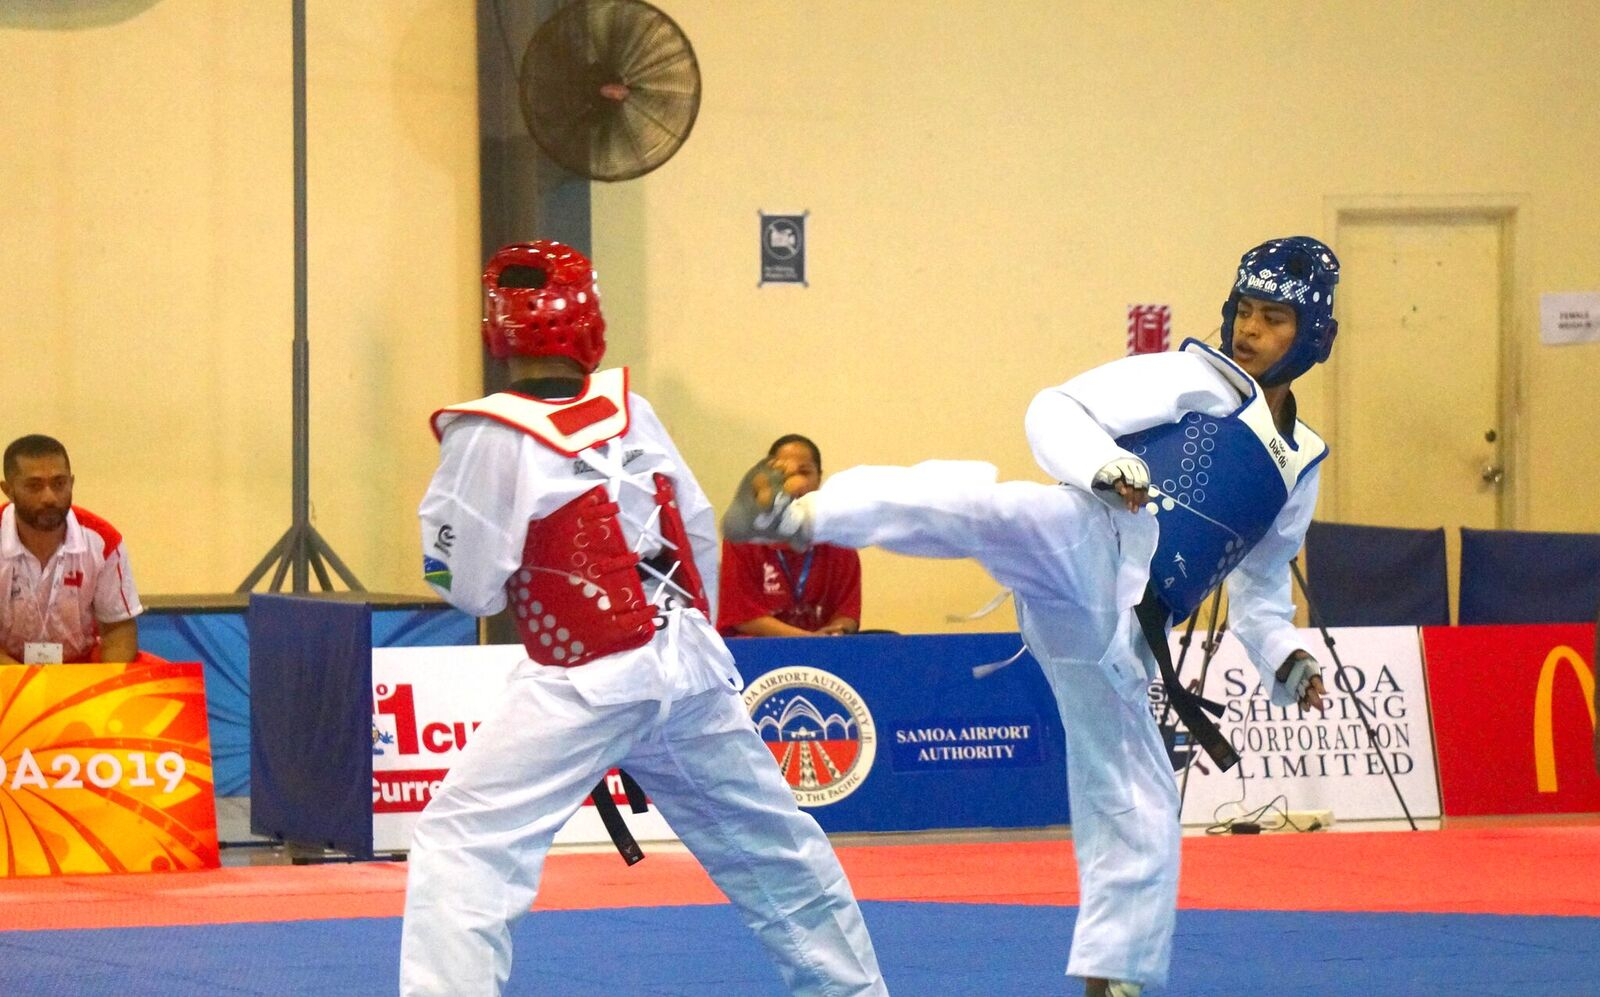 Taekwondo competition began with men's events ©Pacific Games News Service/Karen Anaya